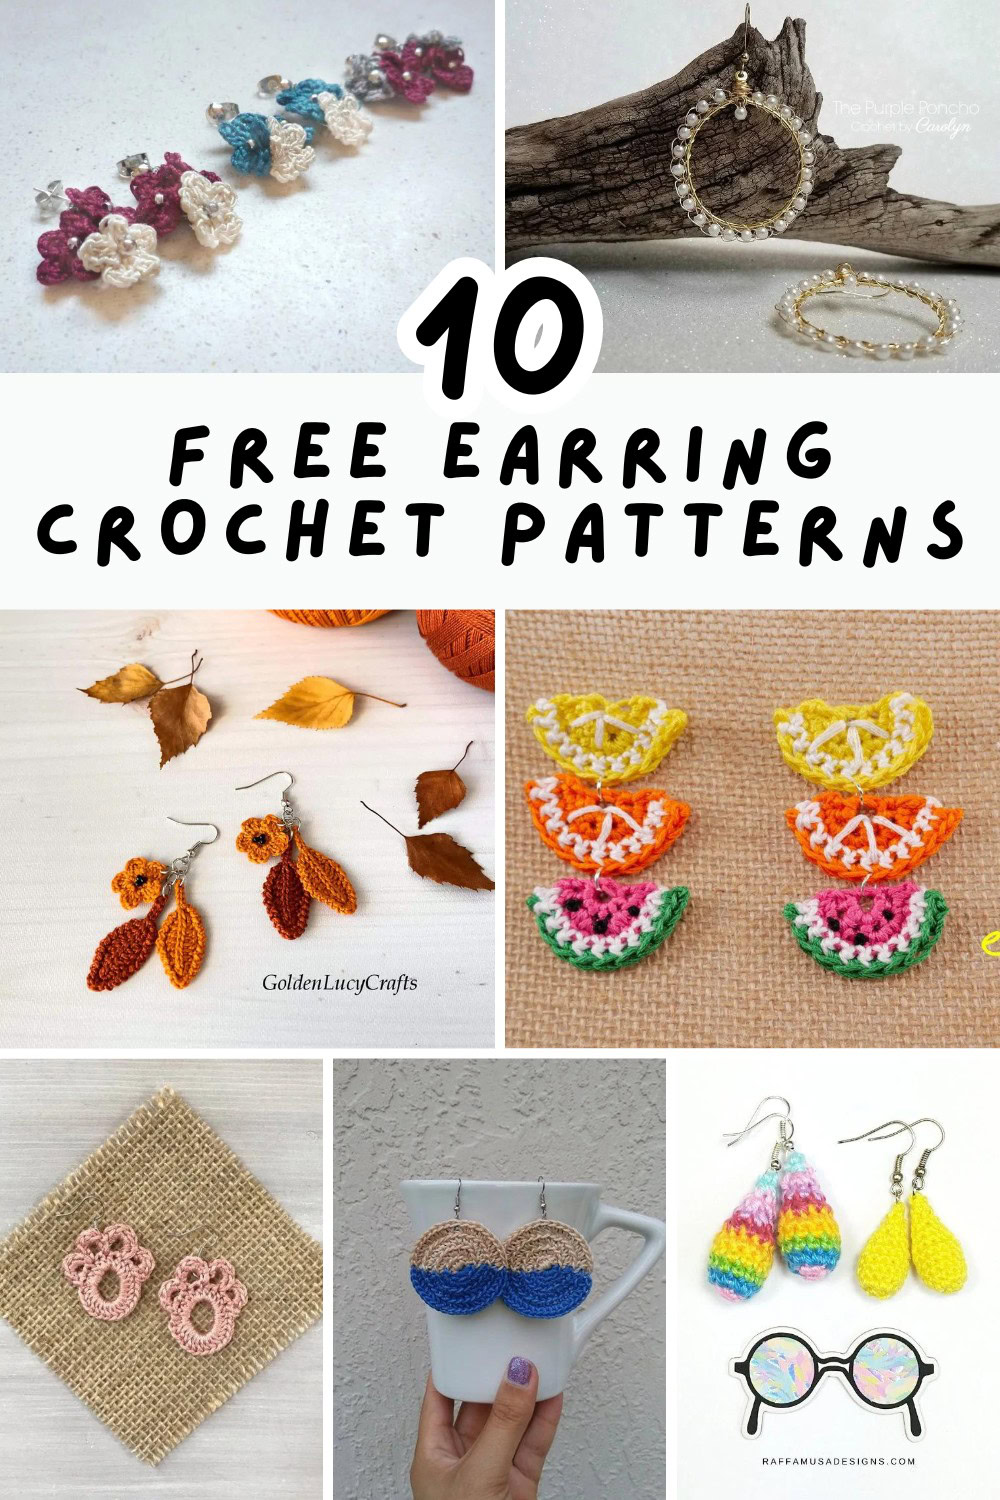 Check out these 10 beautiful and free crochet earring patterns that will add a unique touch to your collection! Whether you love boho styles or classic elegance, these easy patterns are perfect for any crocheter. Time to get creative and show off your handmade accessories! 🧵✨ #CrochetEarrings #HandmadeJewelry #FreePatterns